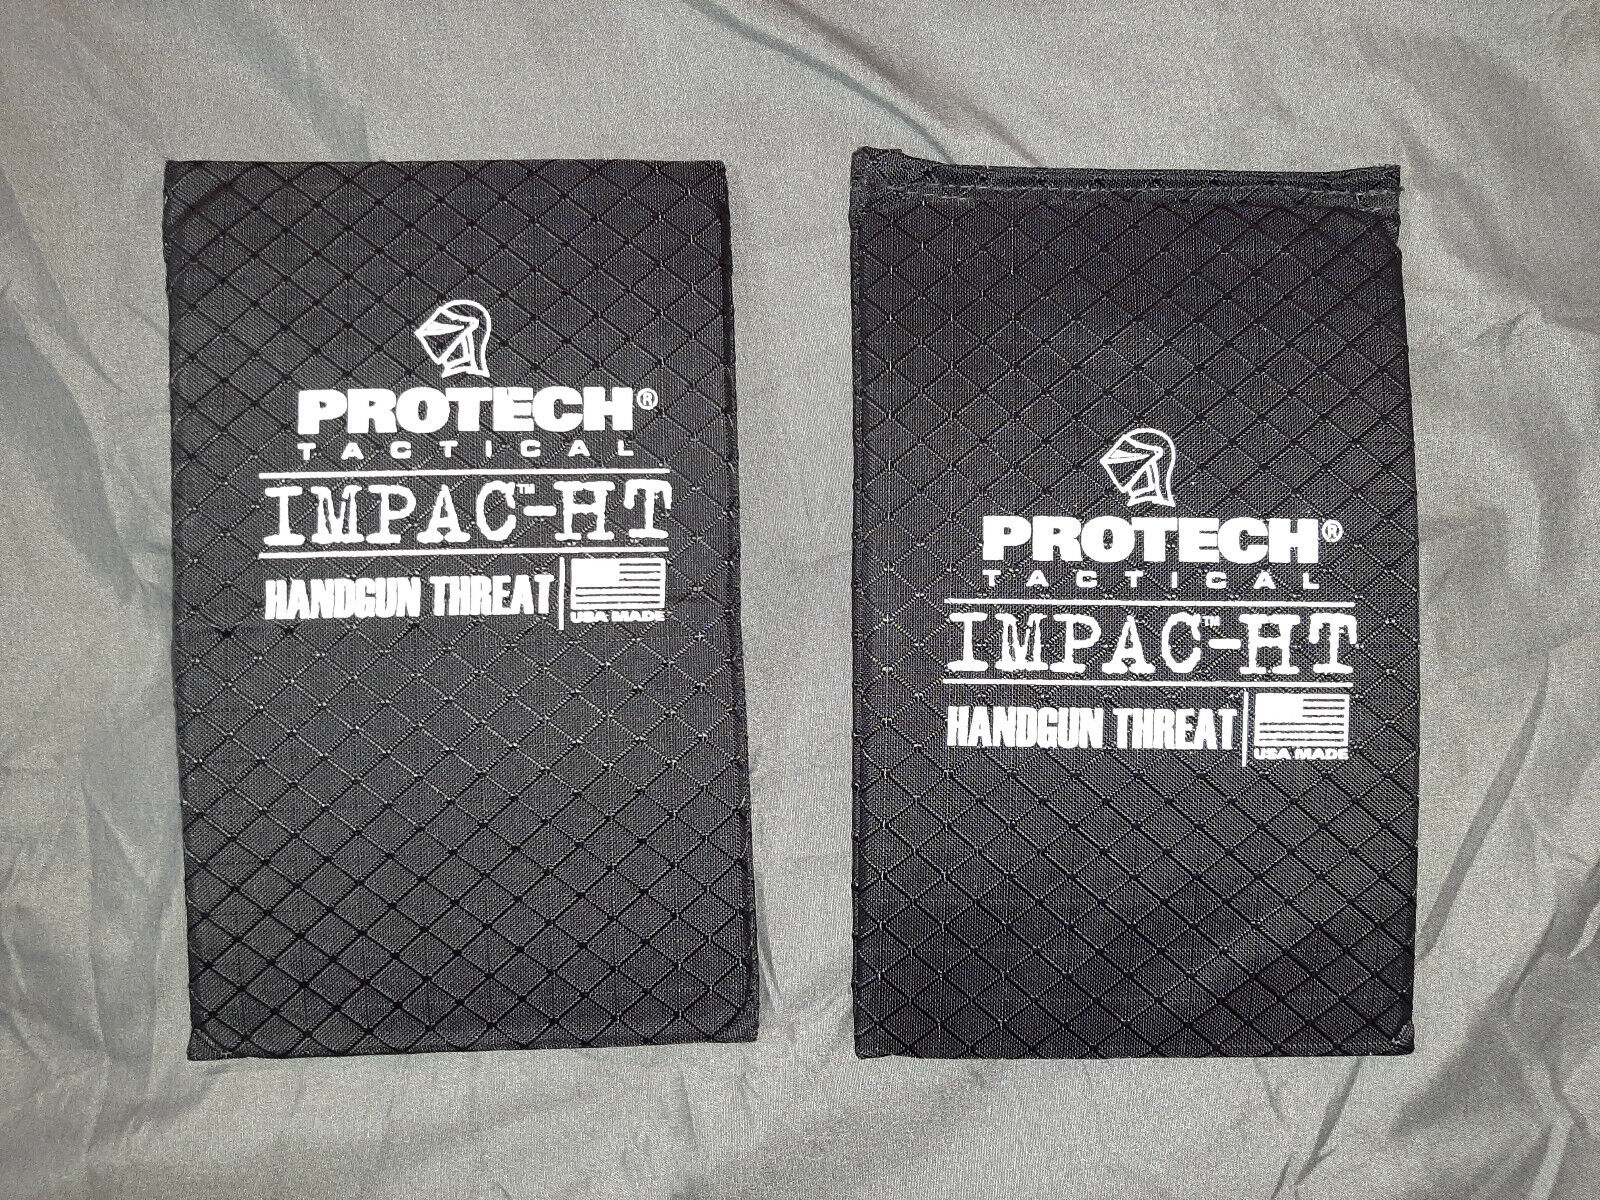 Safariland Protech Special Threat Armor Plate Impac-HT Pair 5x8